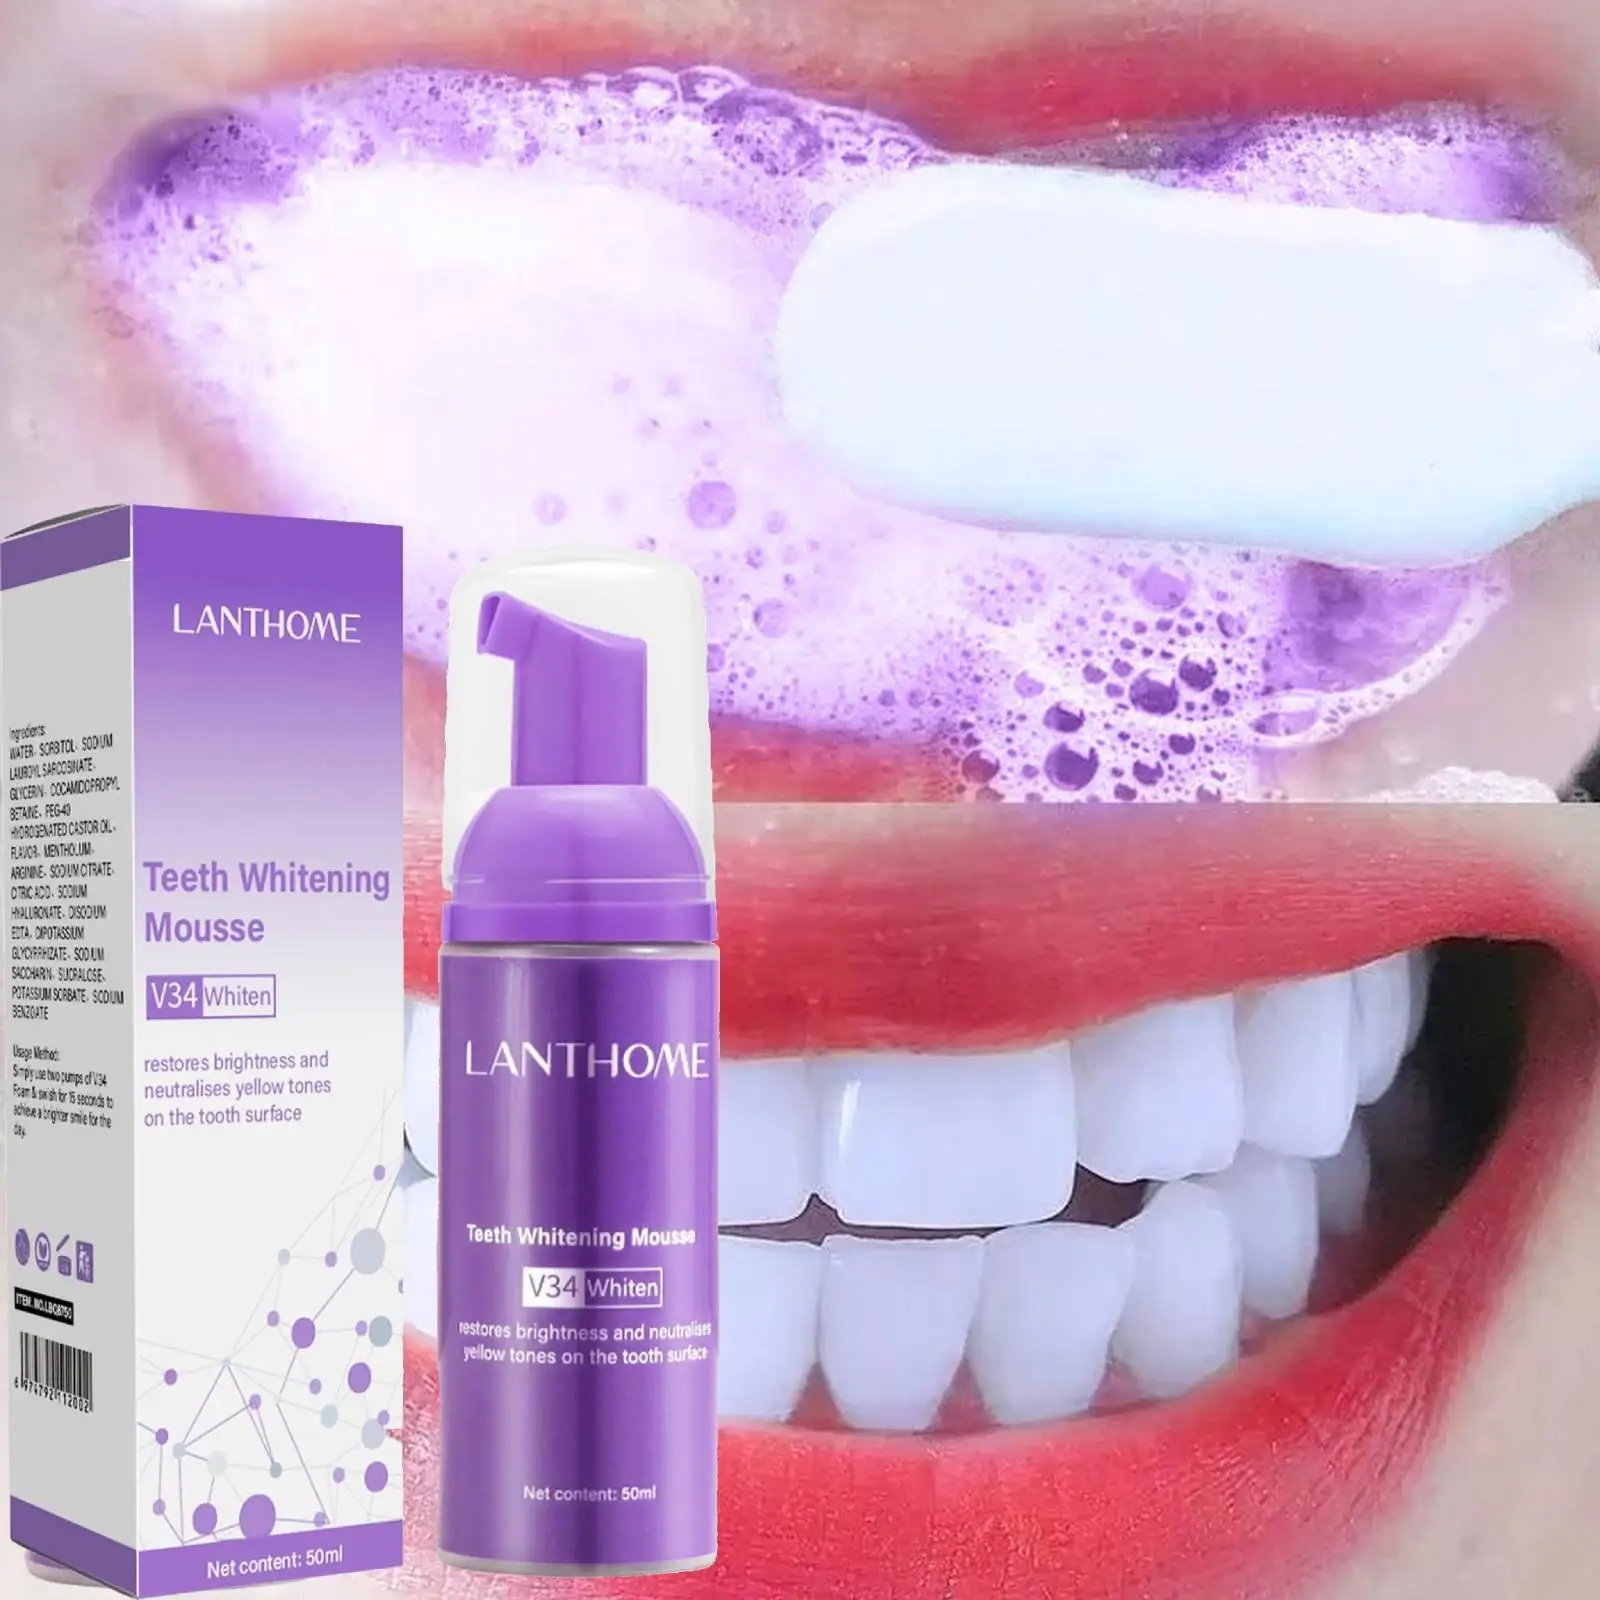 

Toothpaste Whitening Foam Natural Mouth Wash Mousse Teeth Whitening Teethpaste Hygiene Breath Dental Tool 50ml Dropshipping